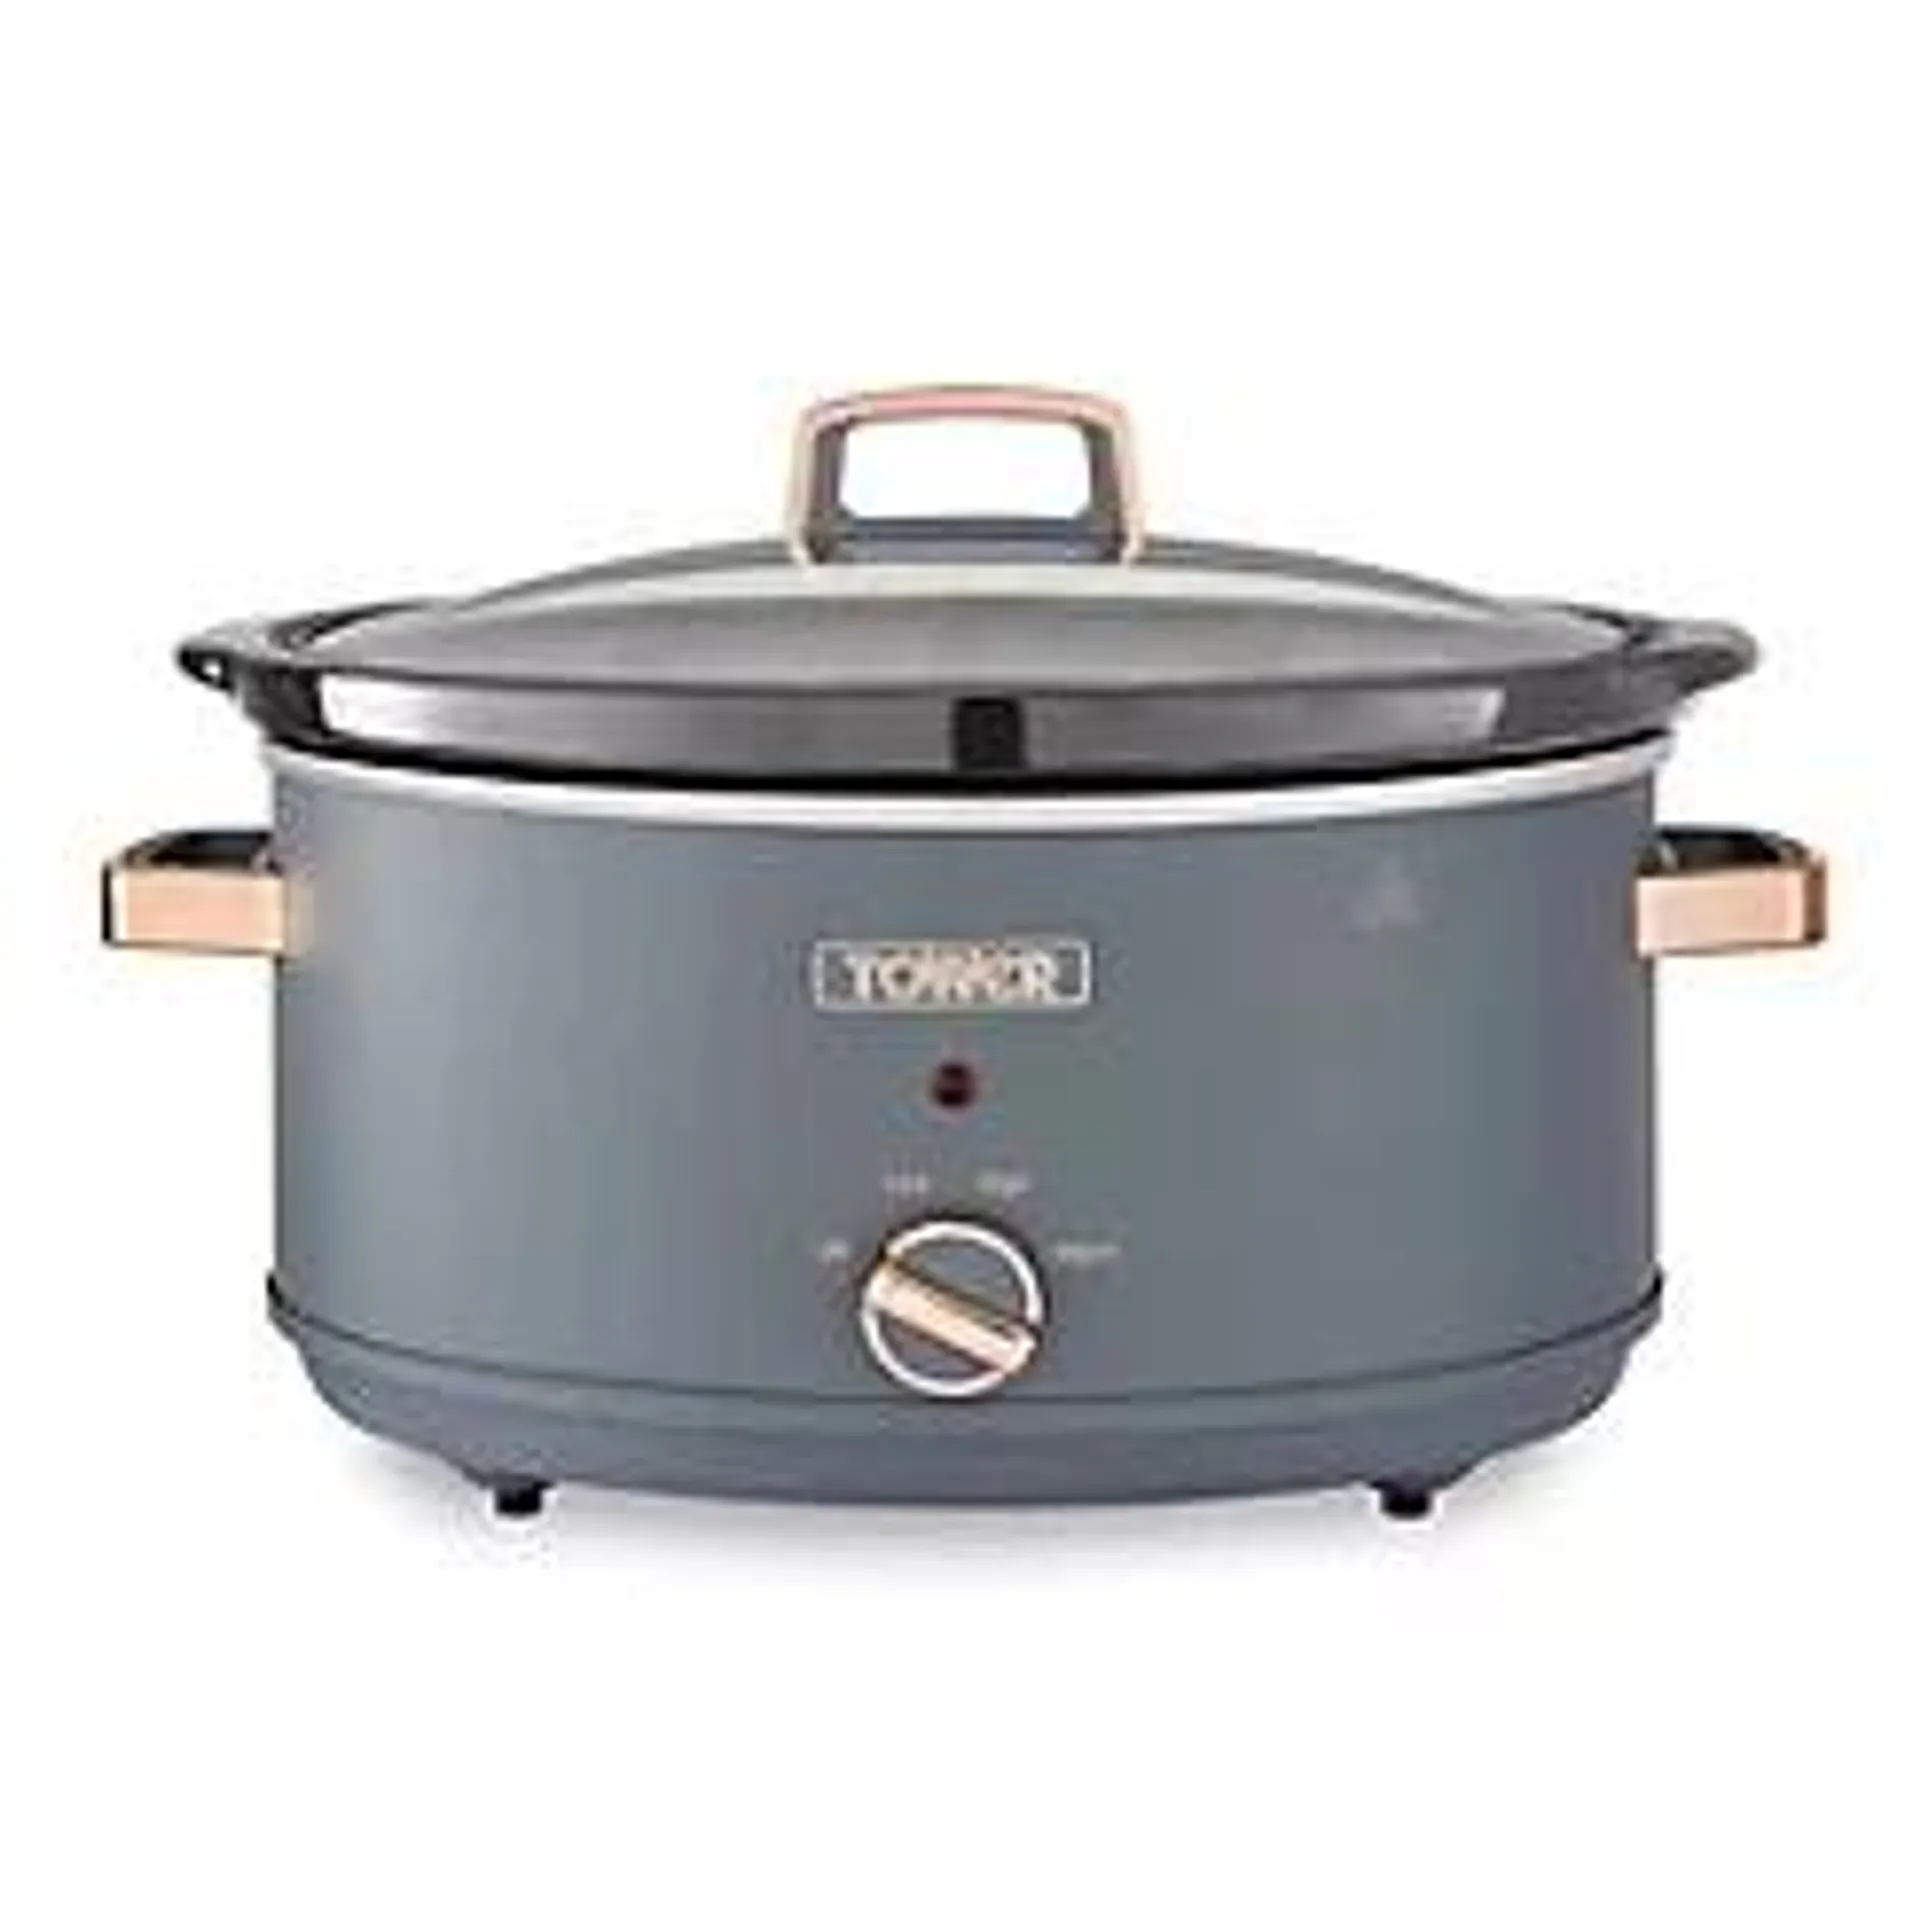 Tower T16043GRY Cavaletto 6.5 Litre Slow Cooker - Grey & Rose Gold